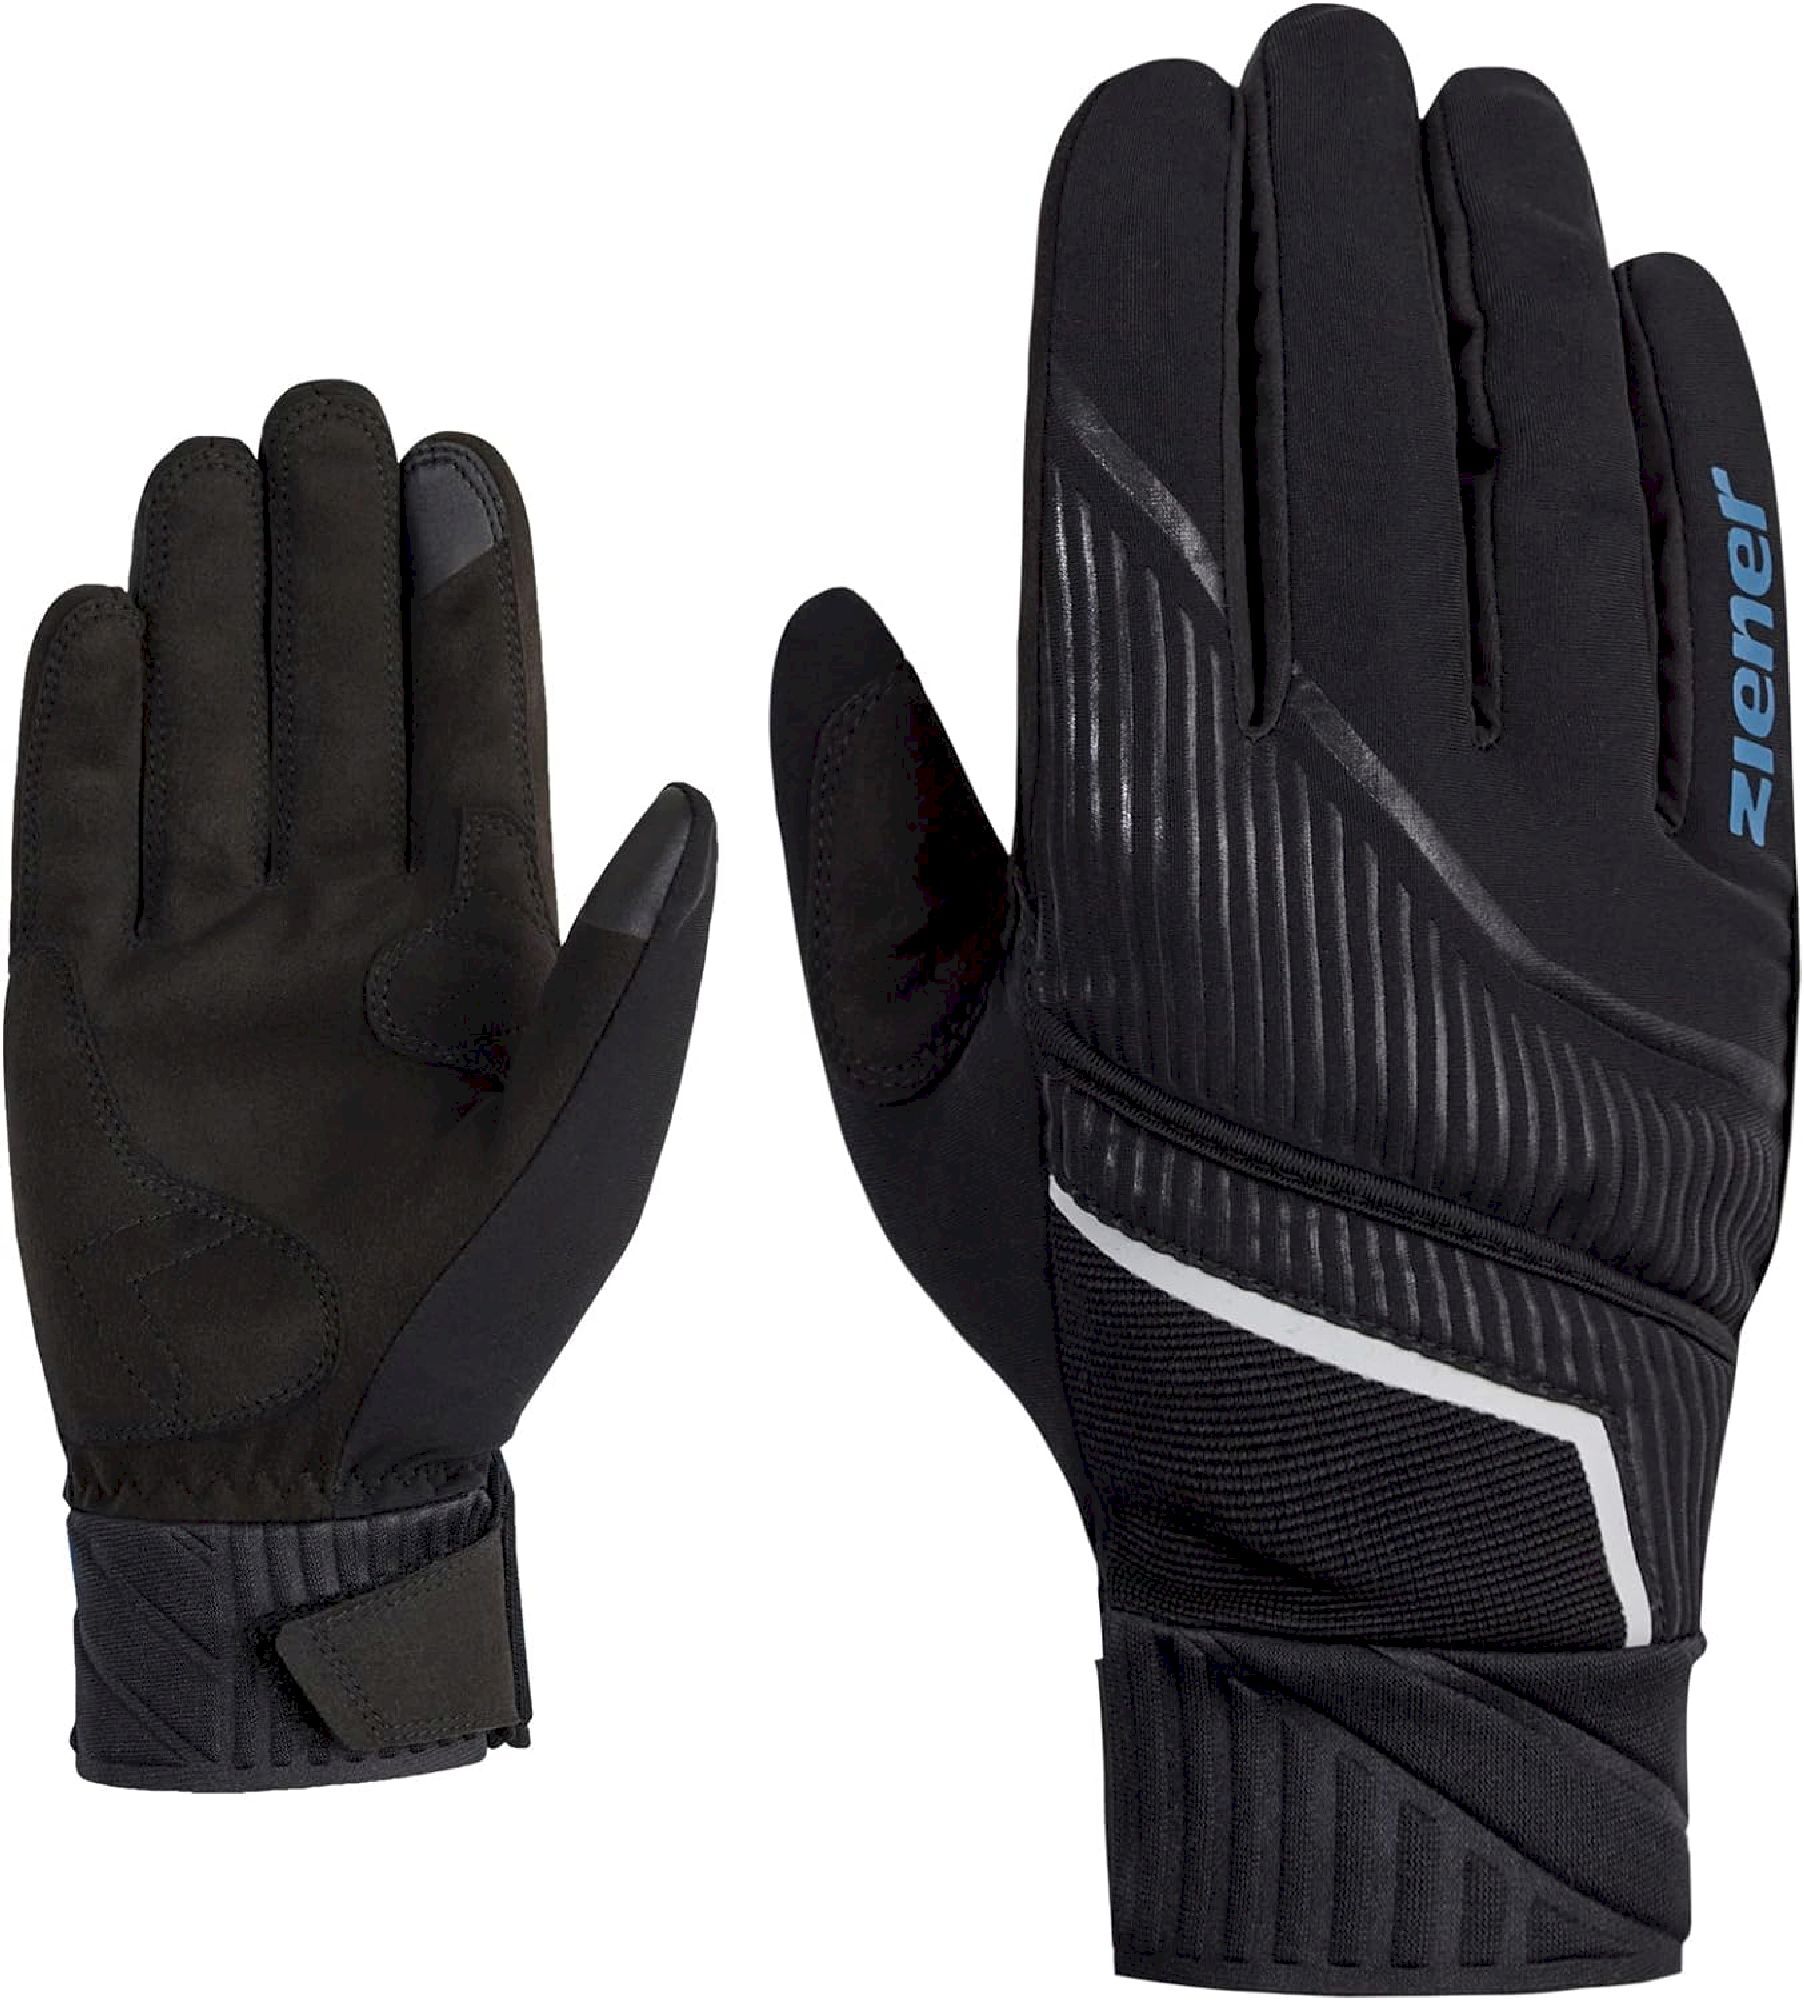 Ziener Ulic Touch - Cross-country ski gloves